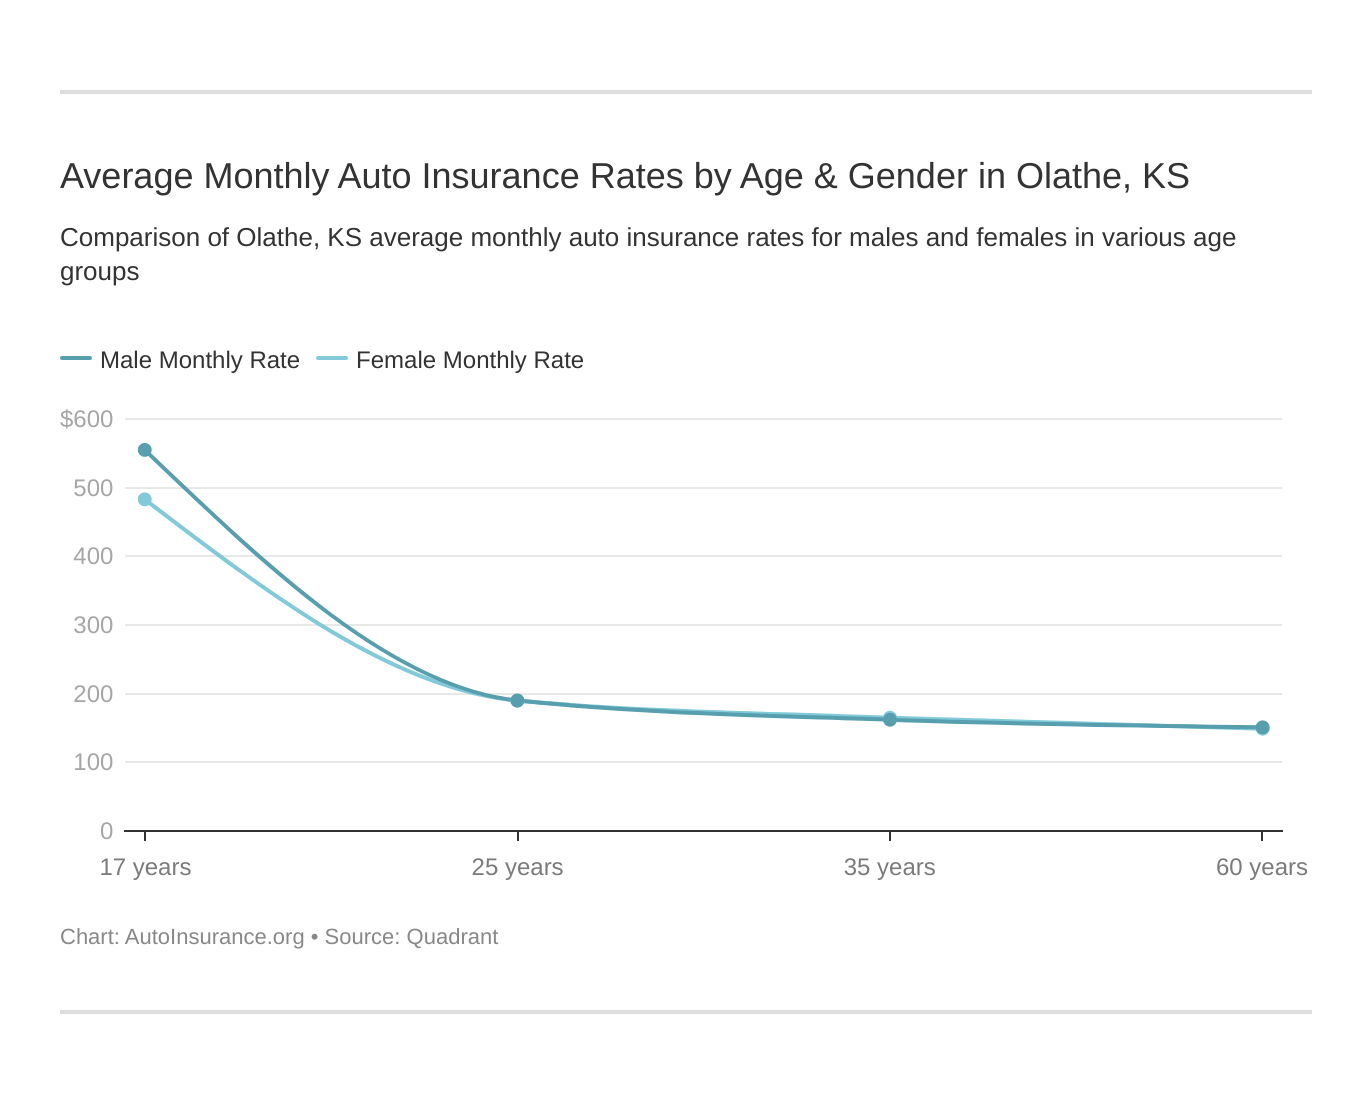 Average Monthly Auto Insurance Rates by Age & Gender in Olathe, KS